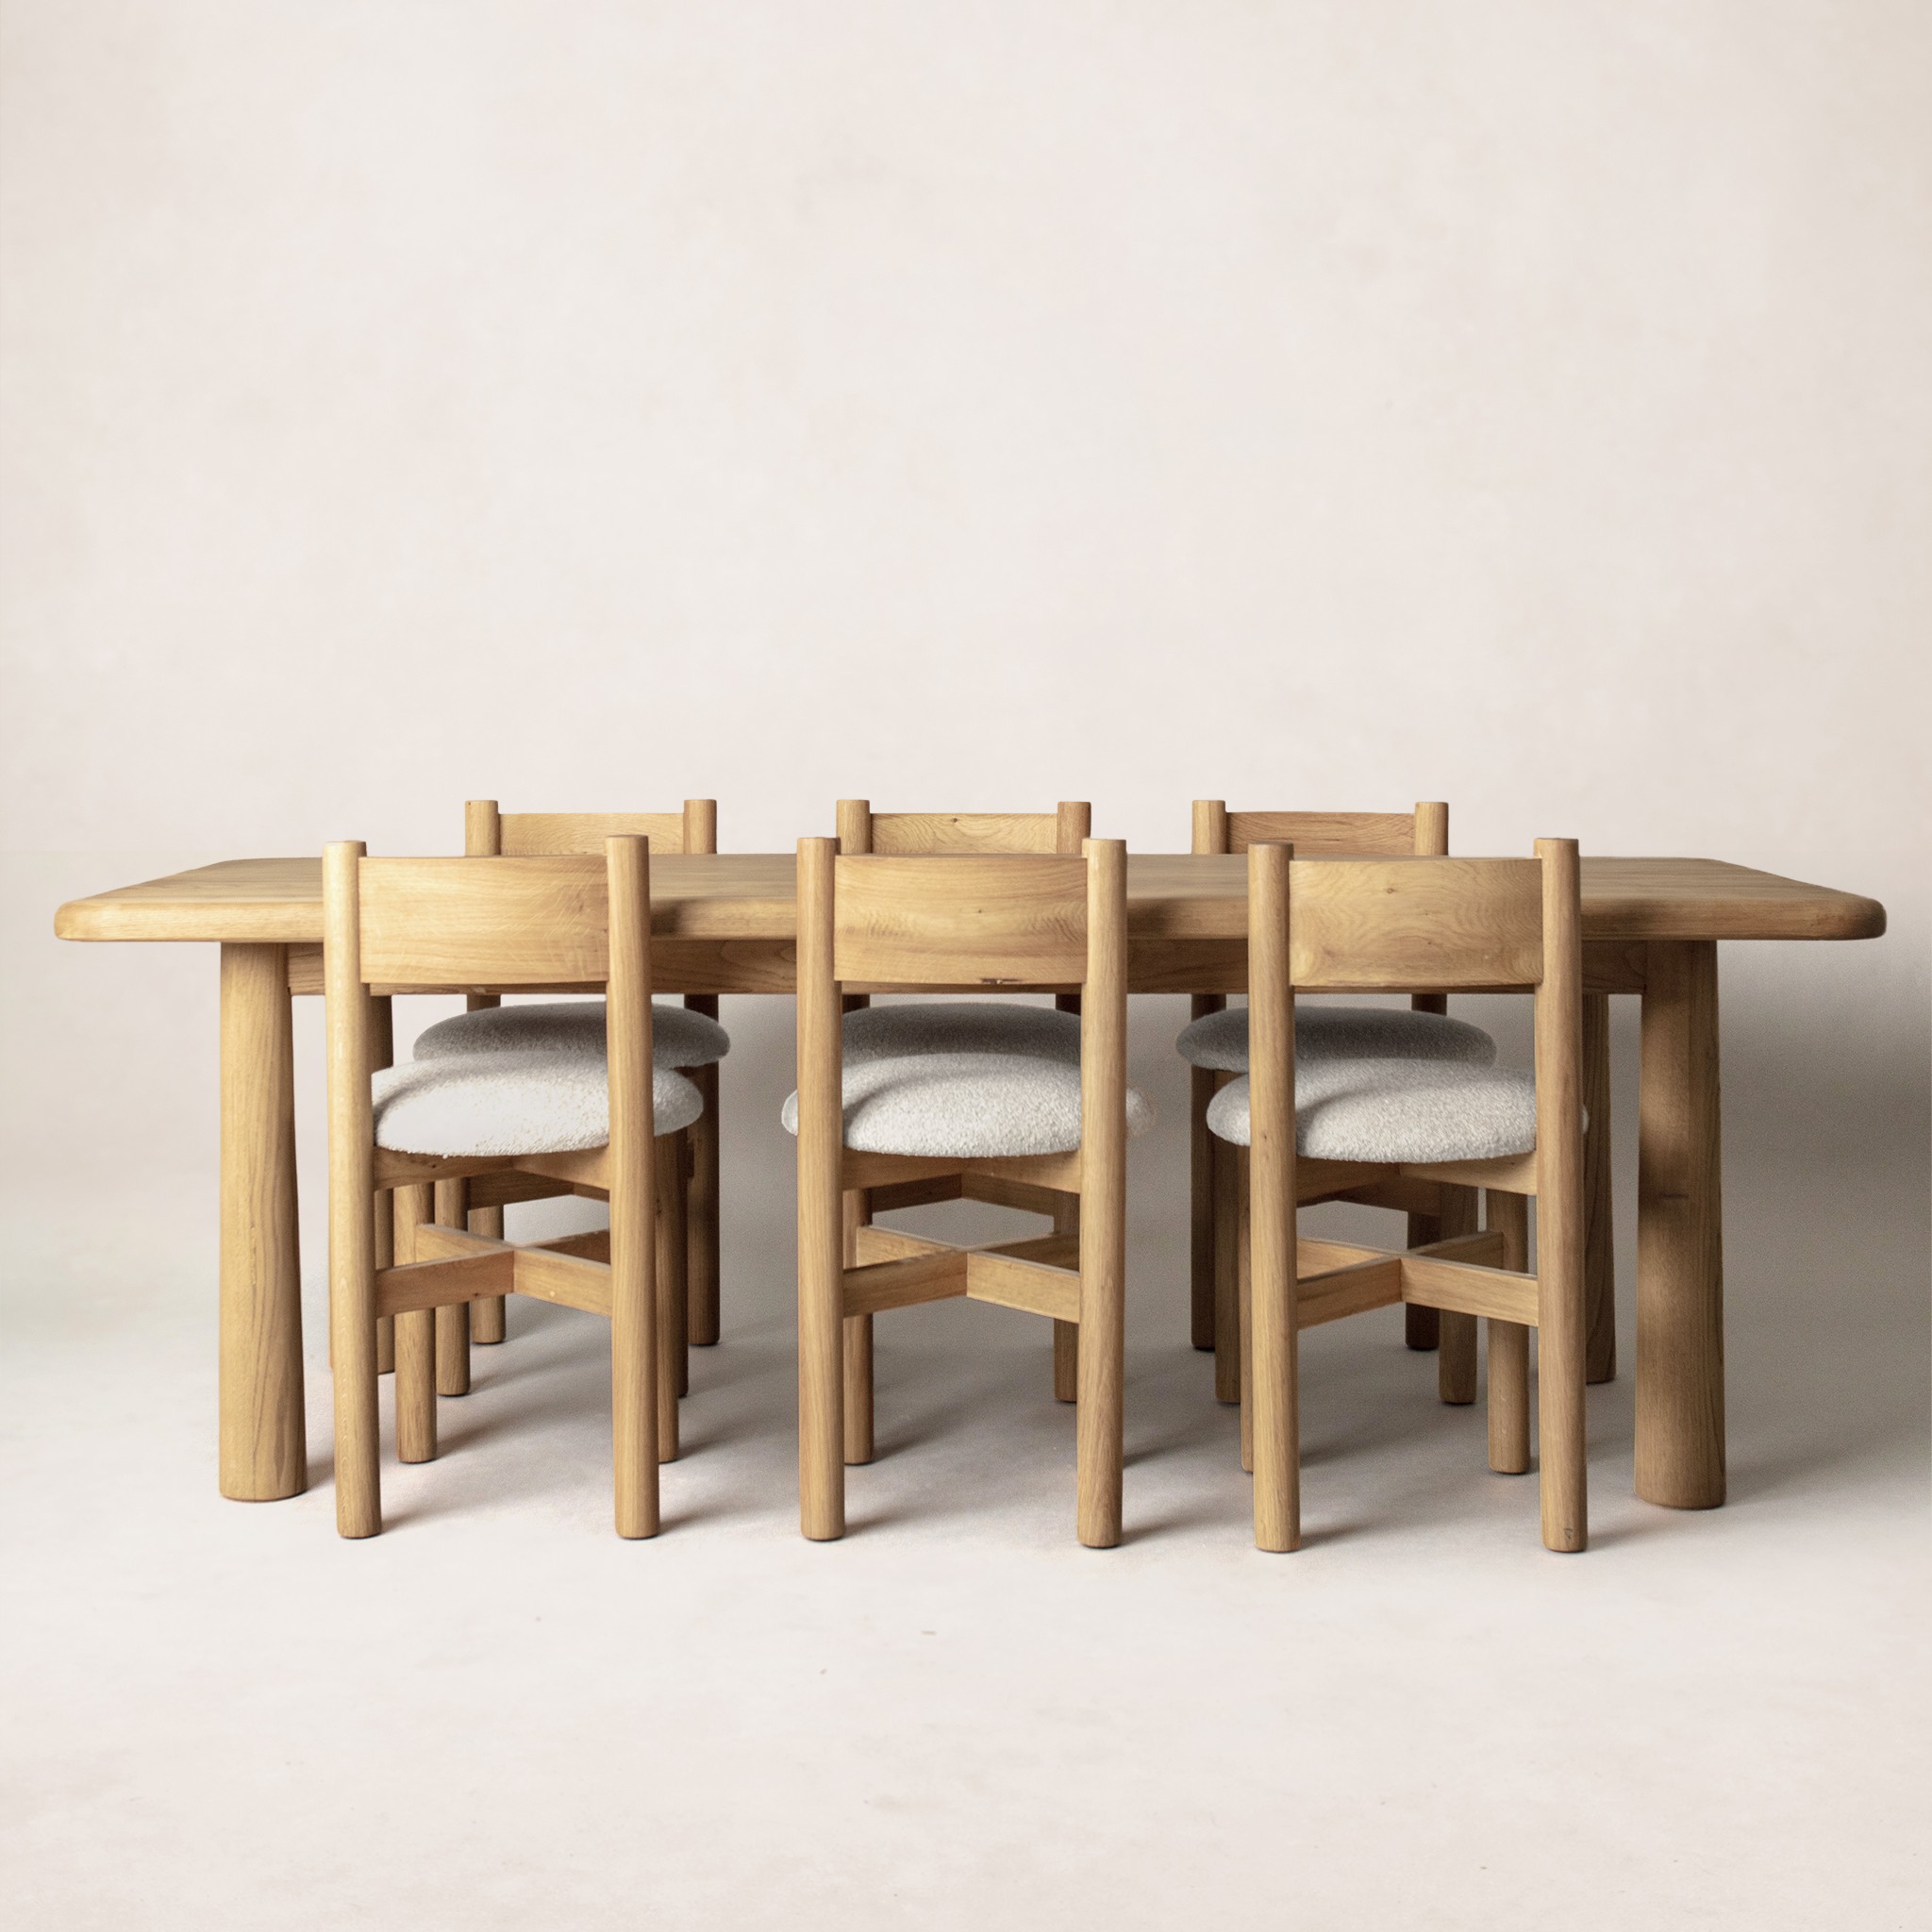 a wooden table with six chairs around it